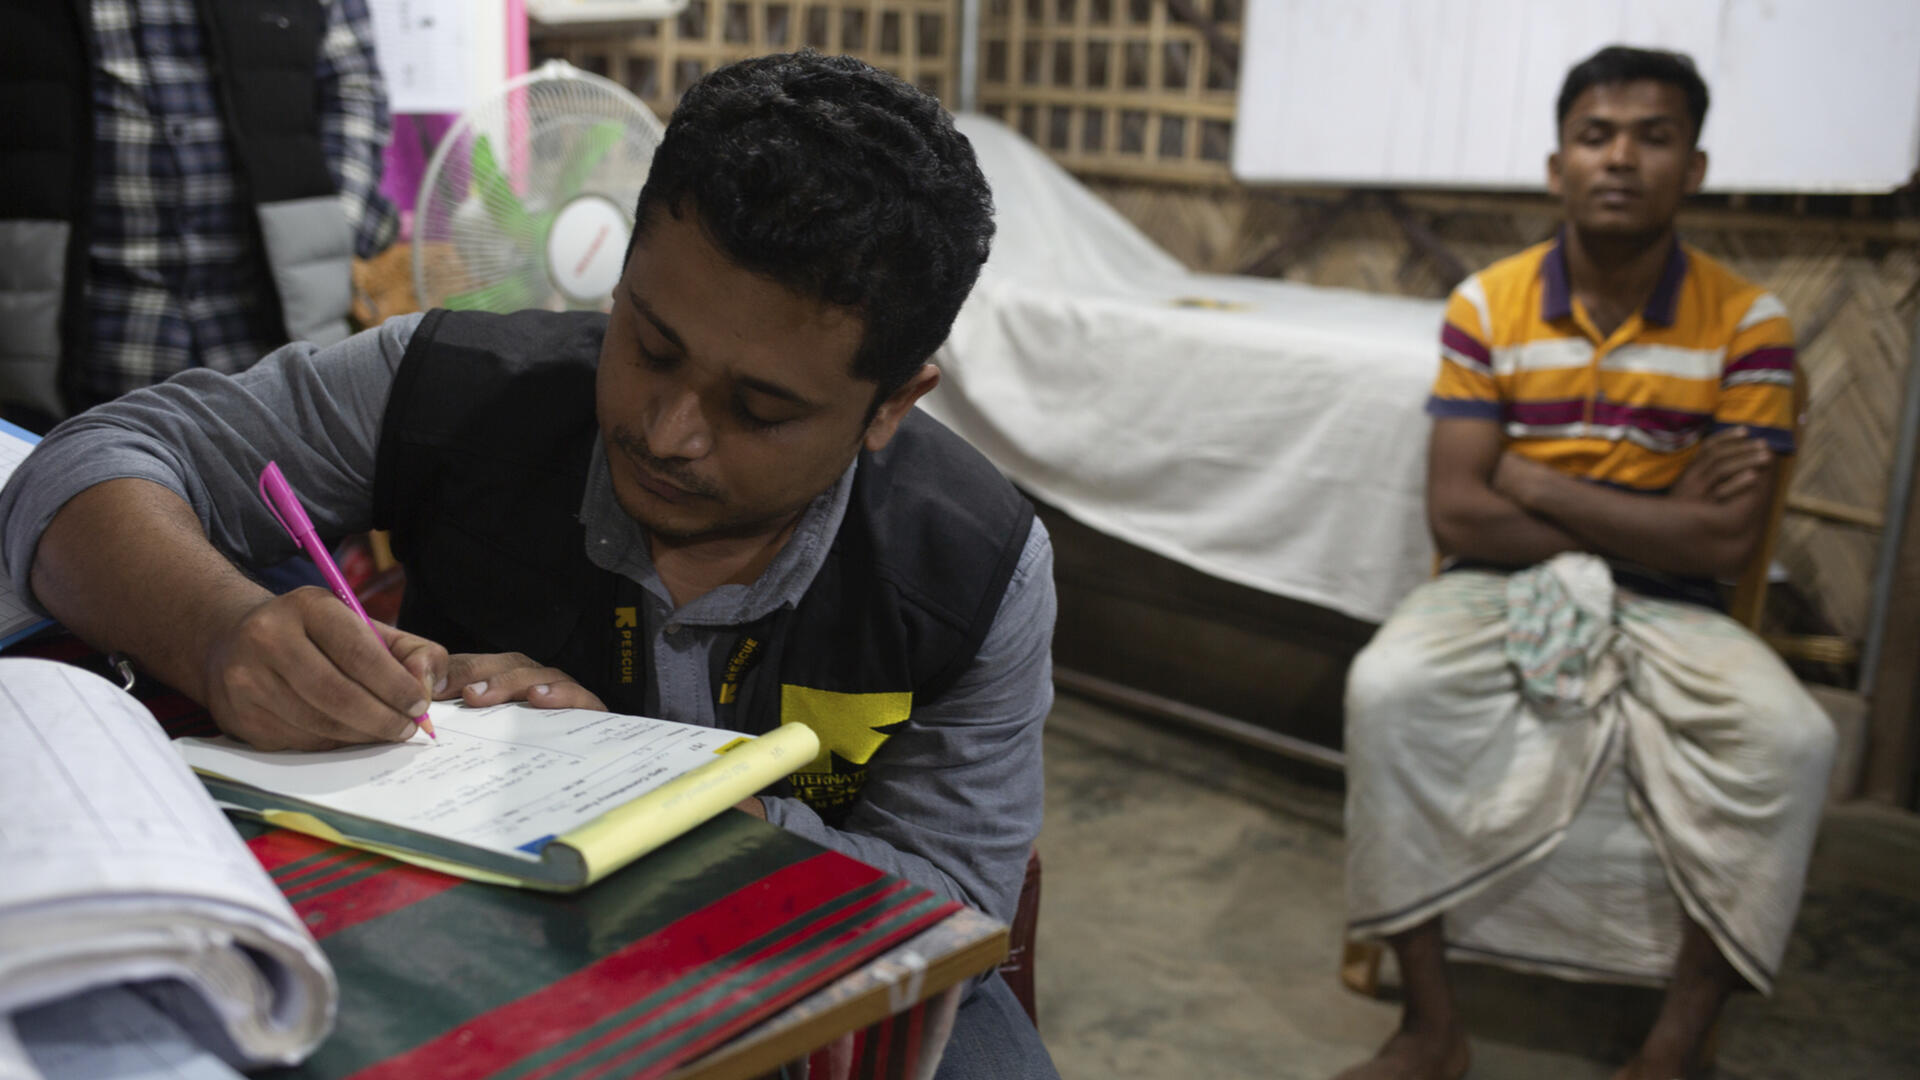 Dr. Mahmudul Hossain, wearing an IRC vest, sits at a desk writing notes. A patient sits behind him. 